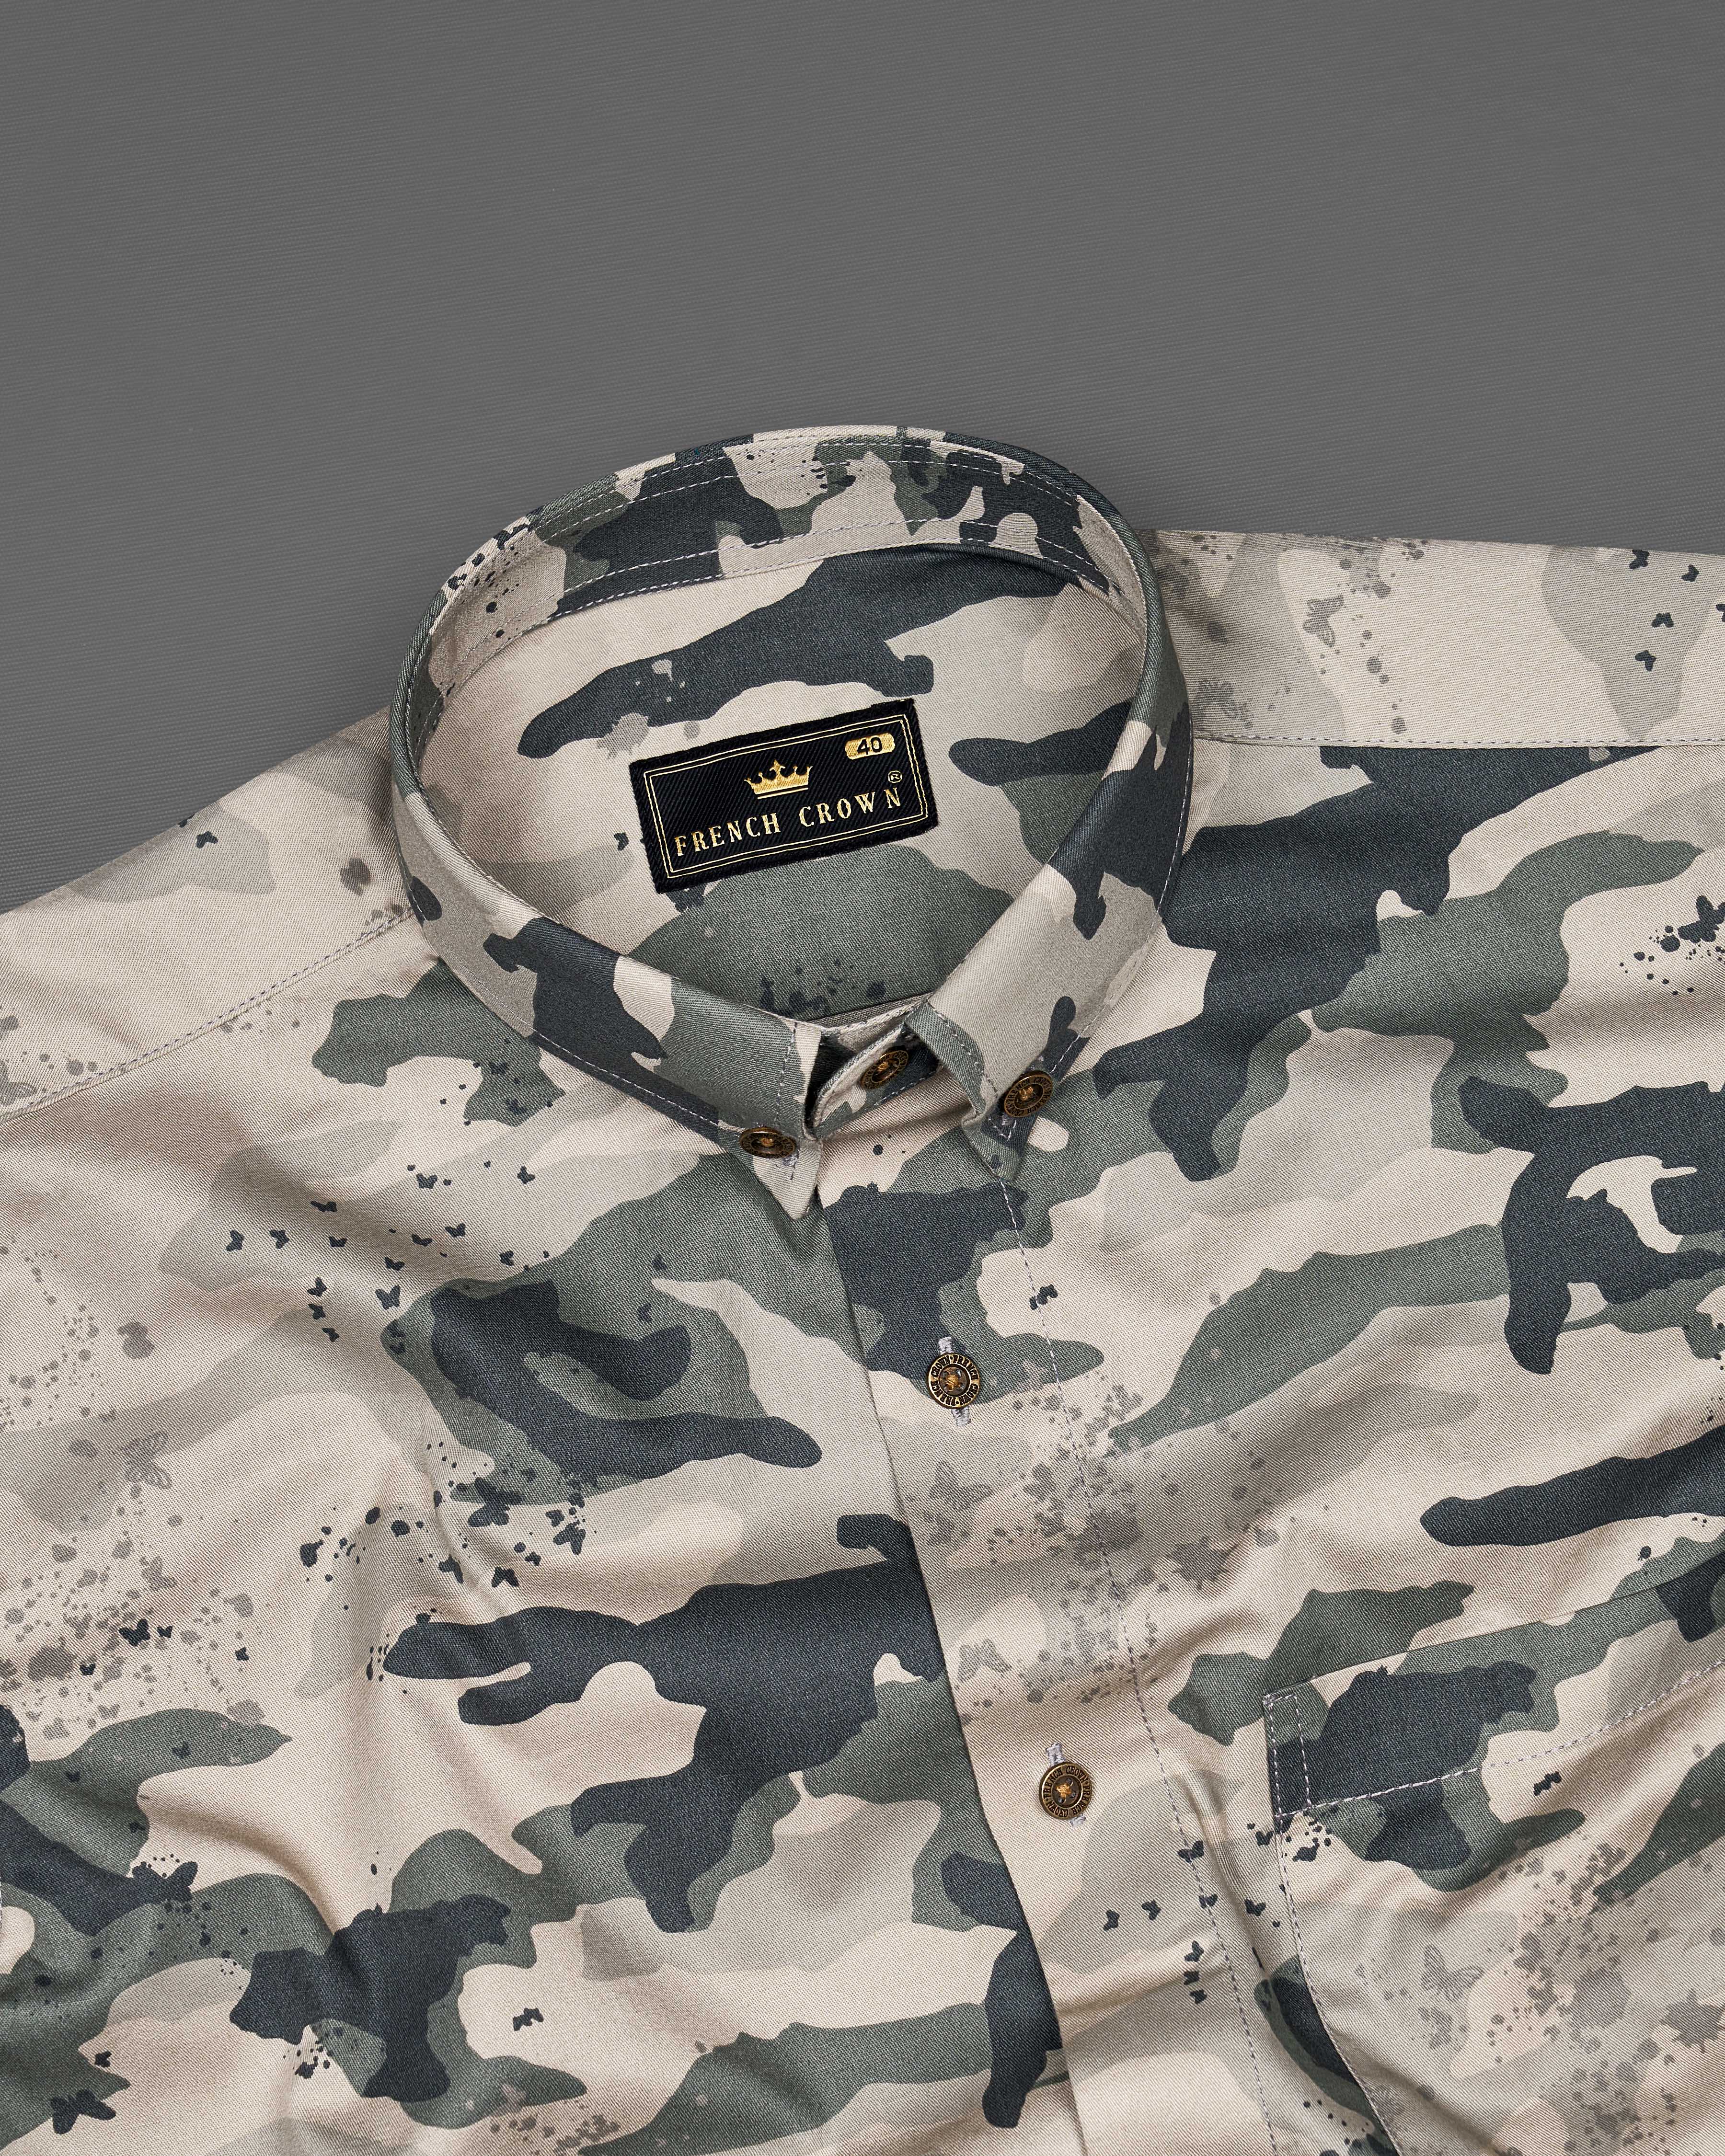 Swirl Brown with Baltic Gray Camouflage Printed Royal Oxford Shirt 8910-BD-MB-38, 8910-BD-MB-H-38,  8910-BD-MB-39,  8910-BD-MB-H-39,  8910-BD-MB-40,  8910-BD-MB-H-40,  8910-BD-MB-42,  8910-BD-MB-H-42,  8910-BD-MB-44,  8910-BD-MB-H-44,  8910-BD-MB-46,  8910-BD-MB-H-46,  8910-BD-MB-48,  8910-BD-MB-H-48,  8910-BD-MB-50,  8910-BD-MB-H-50,  8910-BD-MB-52,  8910-BD-MB-H-52